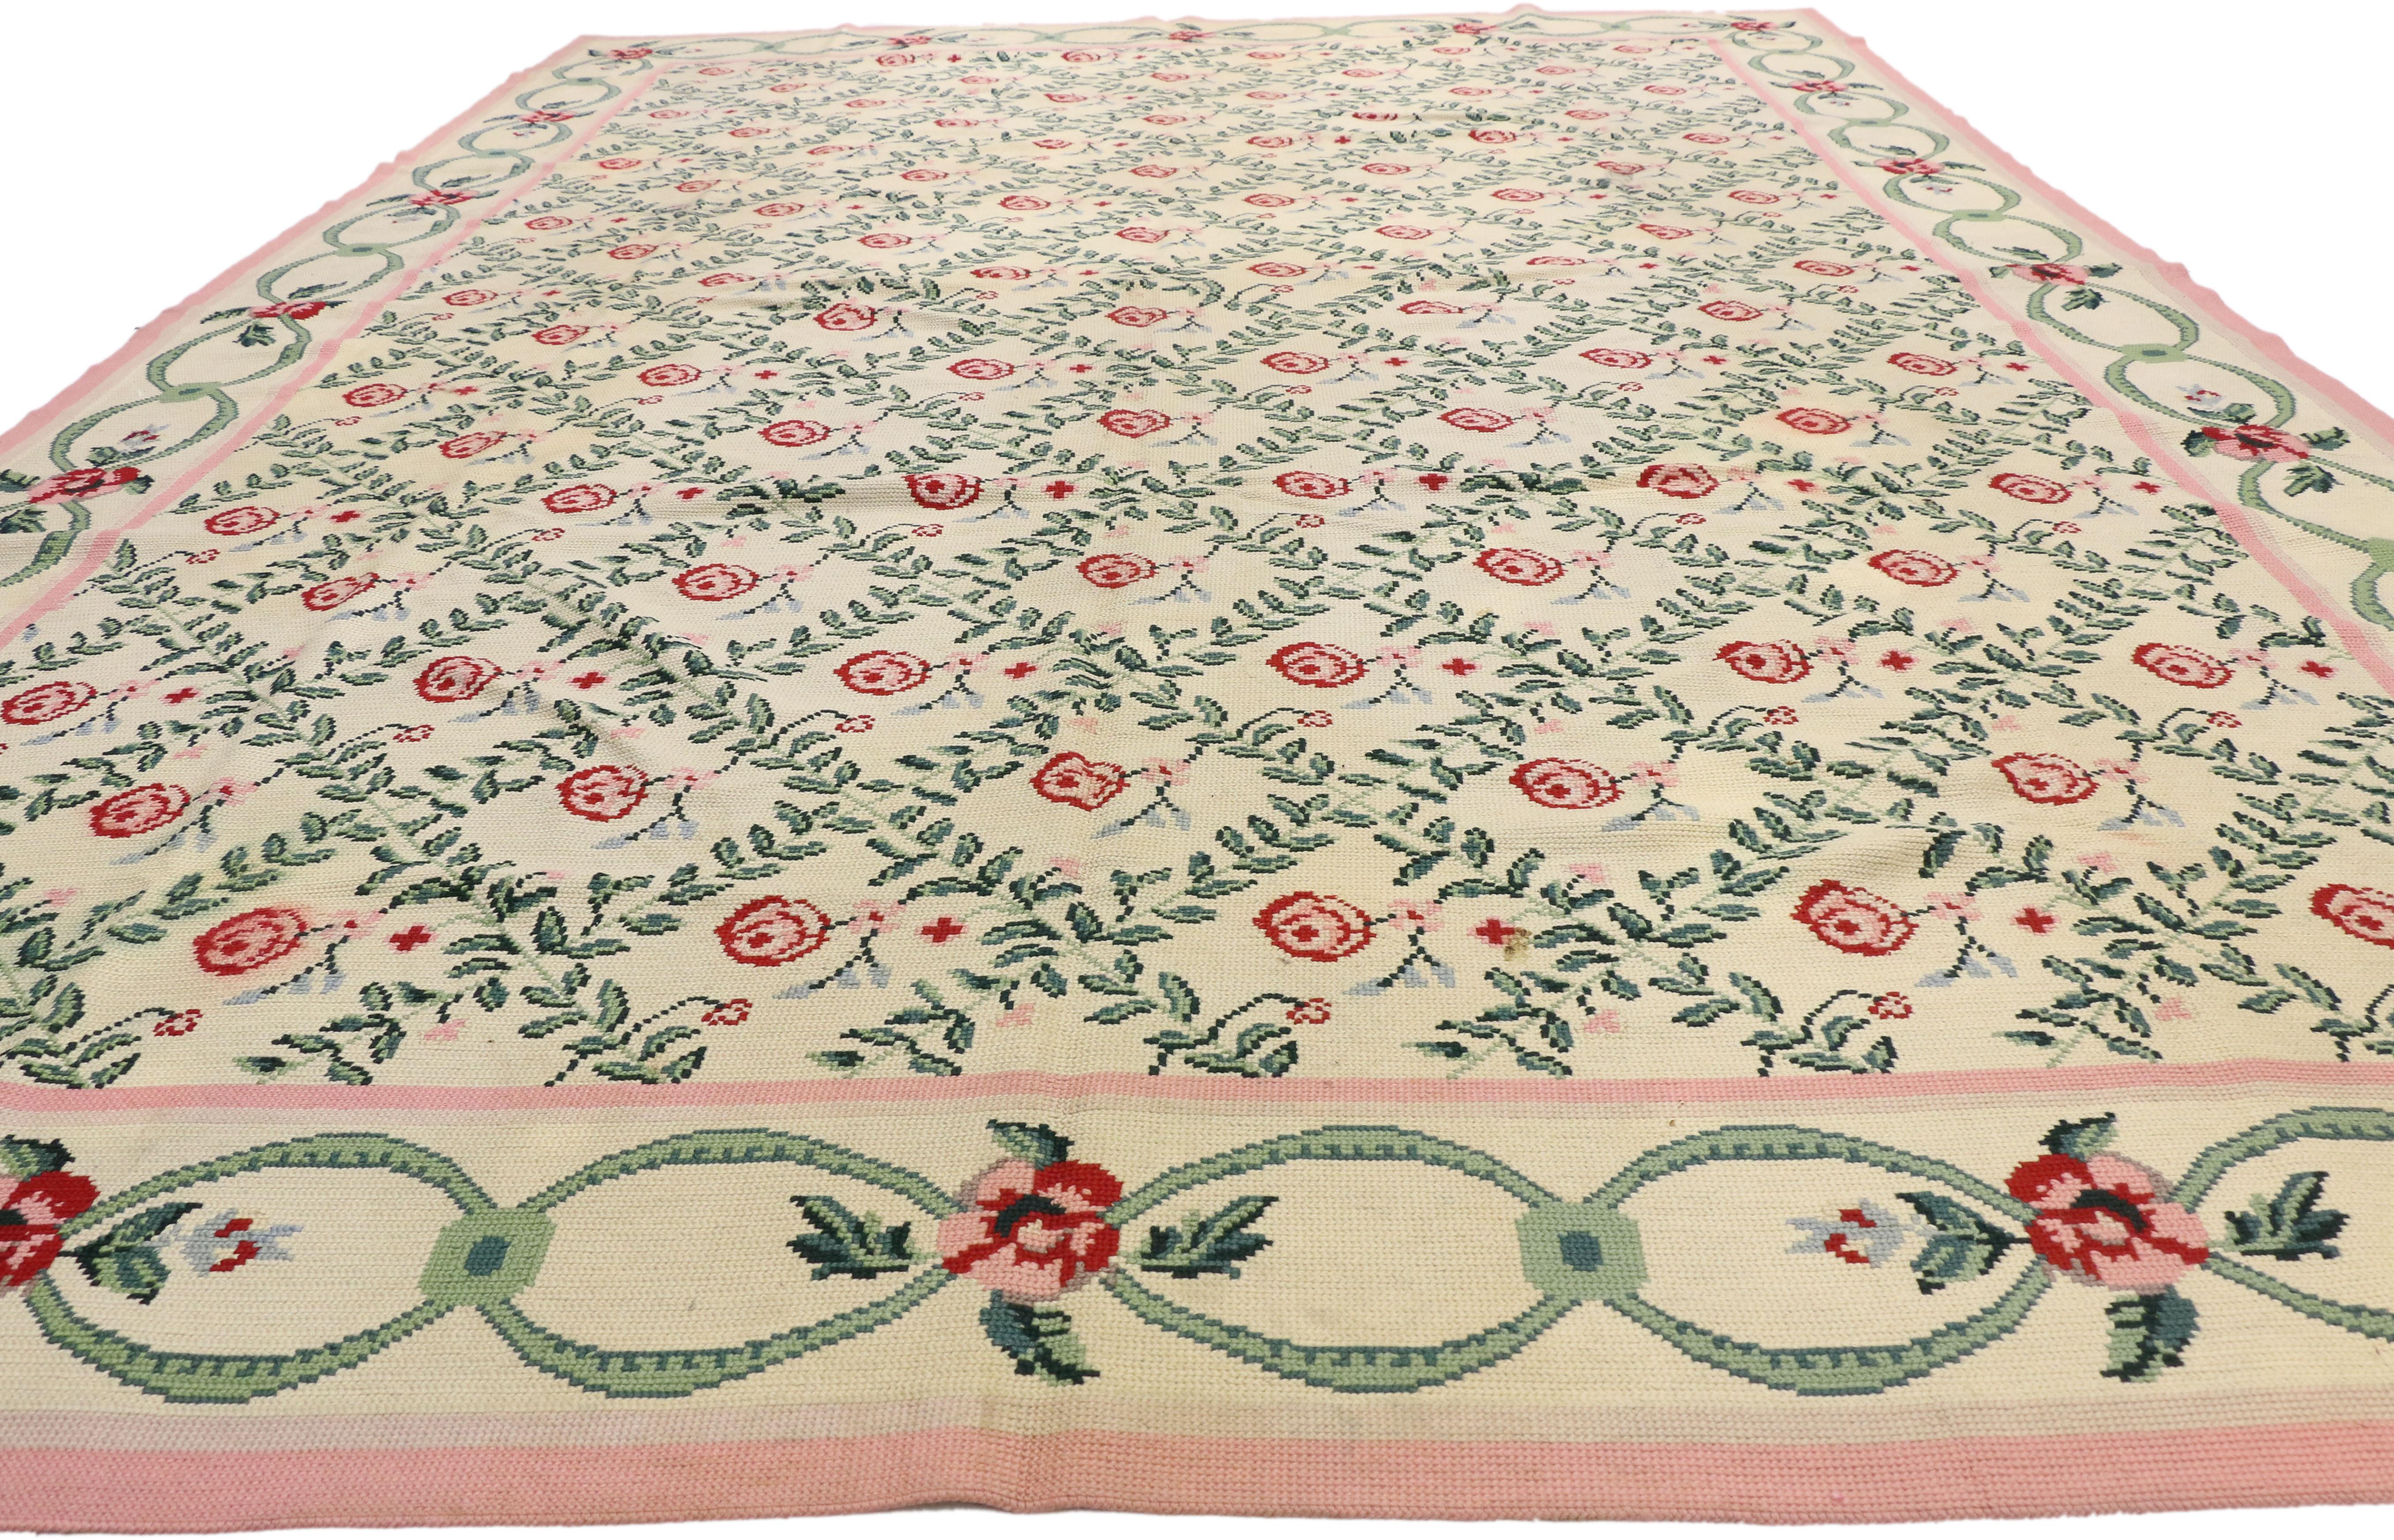 Vintage French Aubusson Floral Trellis Needlepoint Chinese Rug with Chintz Style In Fair Condition For Sale In Dallas, TX